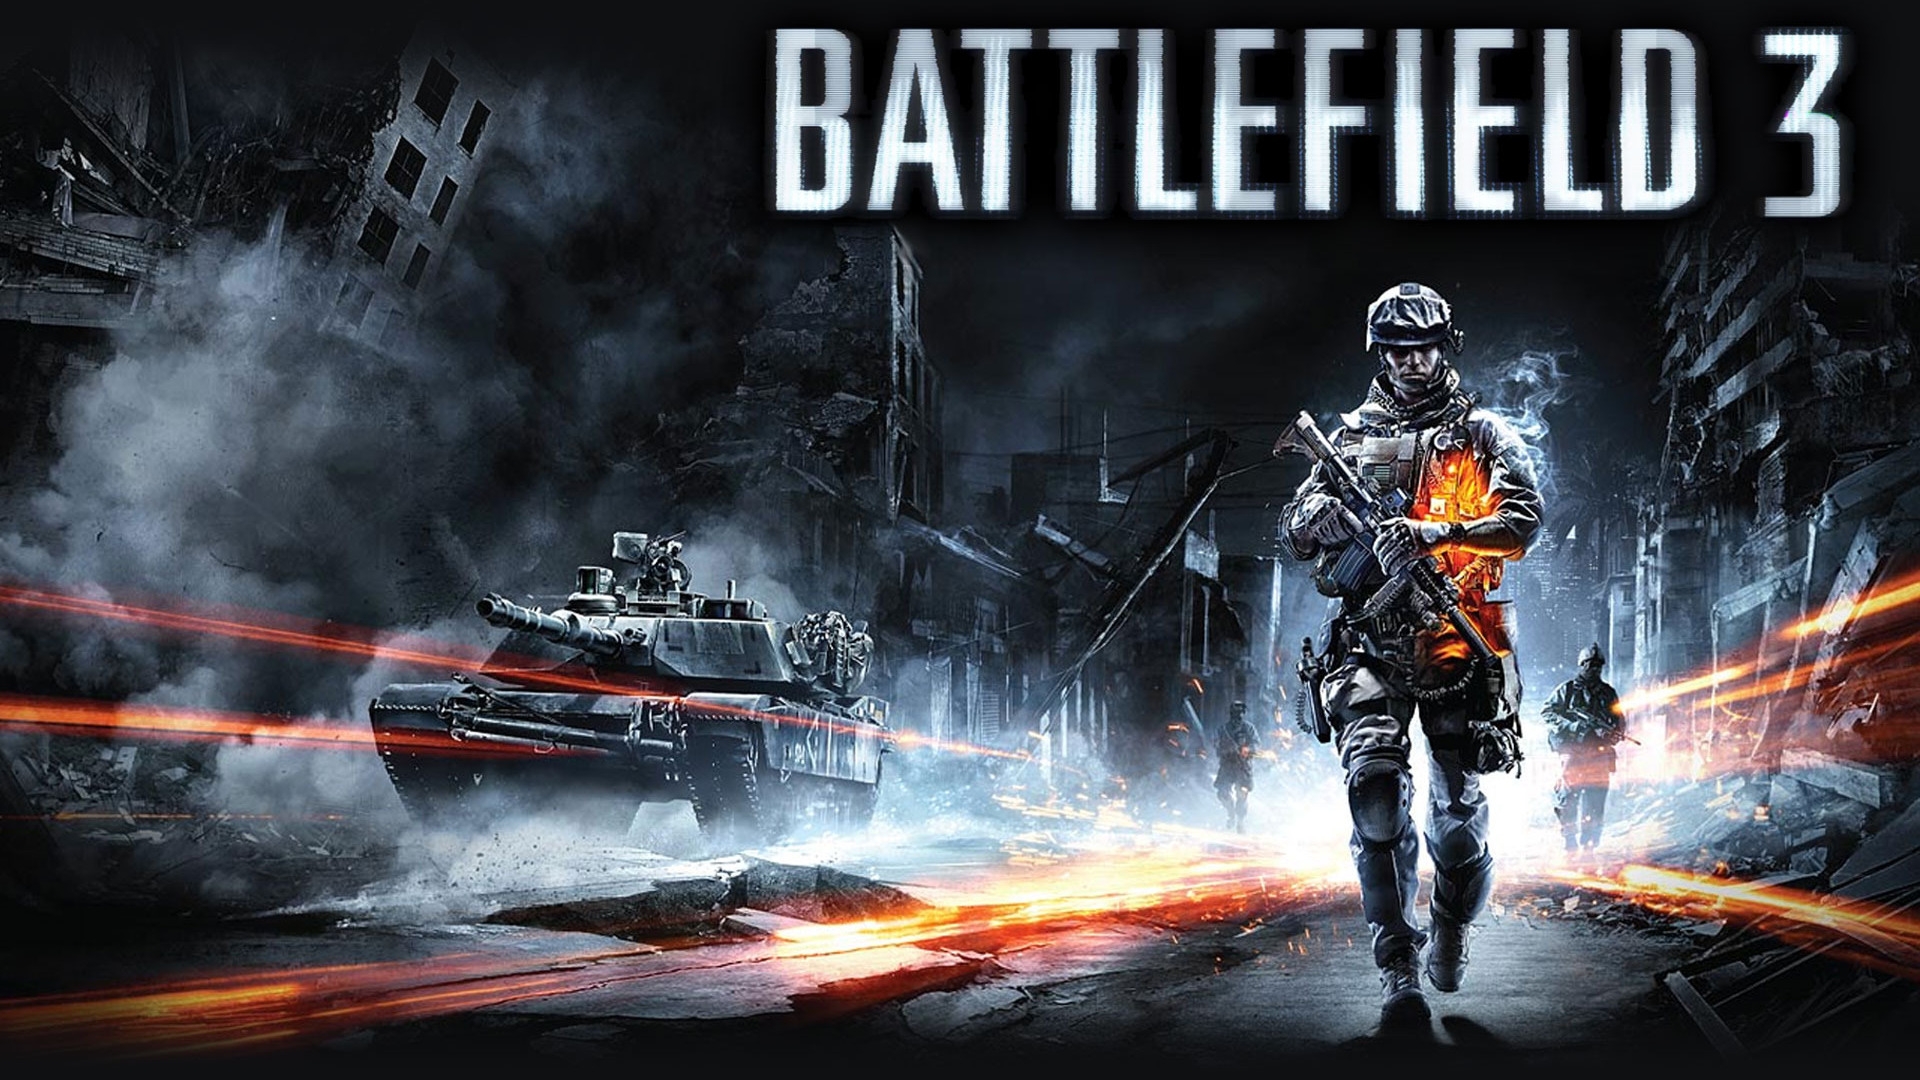 battlefield 3 wallpaper hd,action adventure game,pc game,games,shooter game,movie